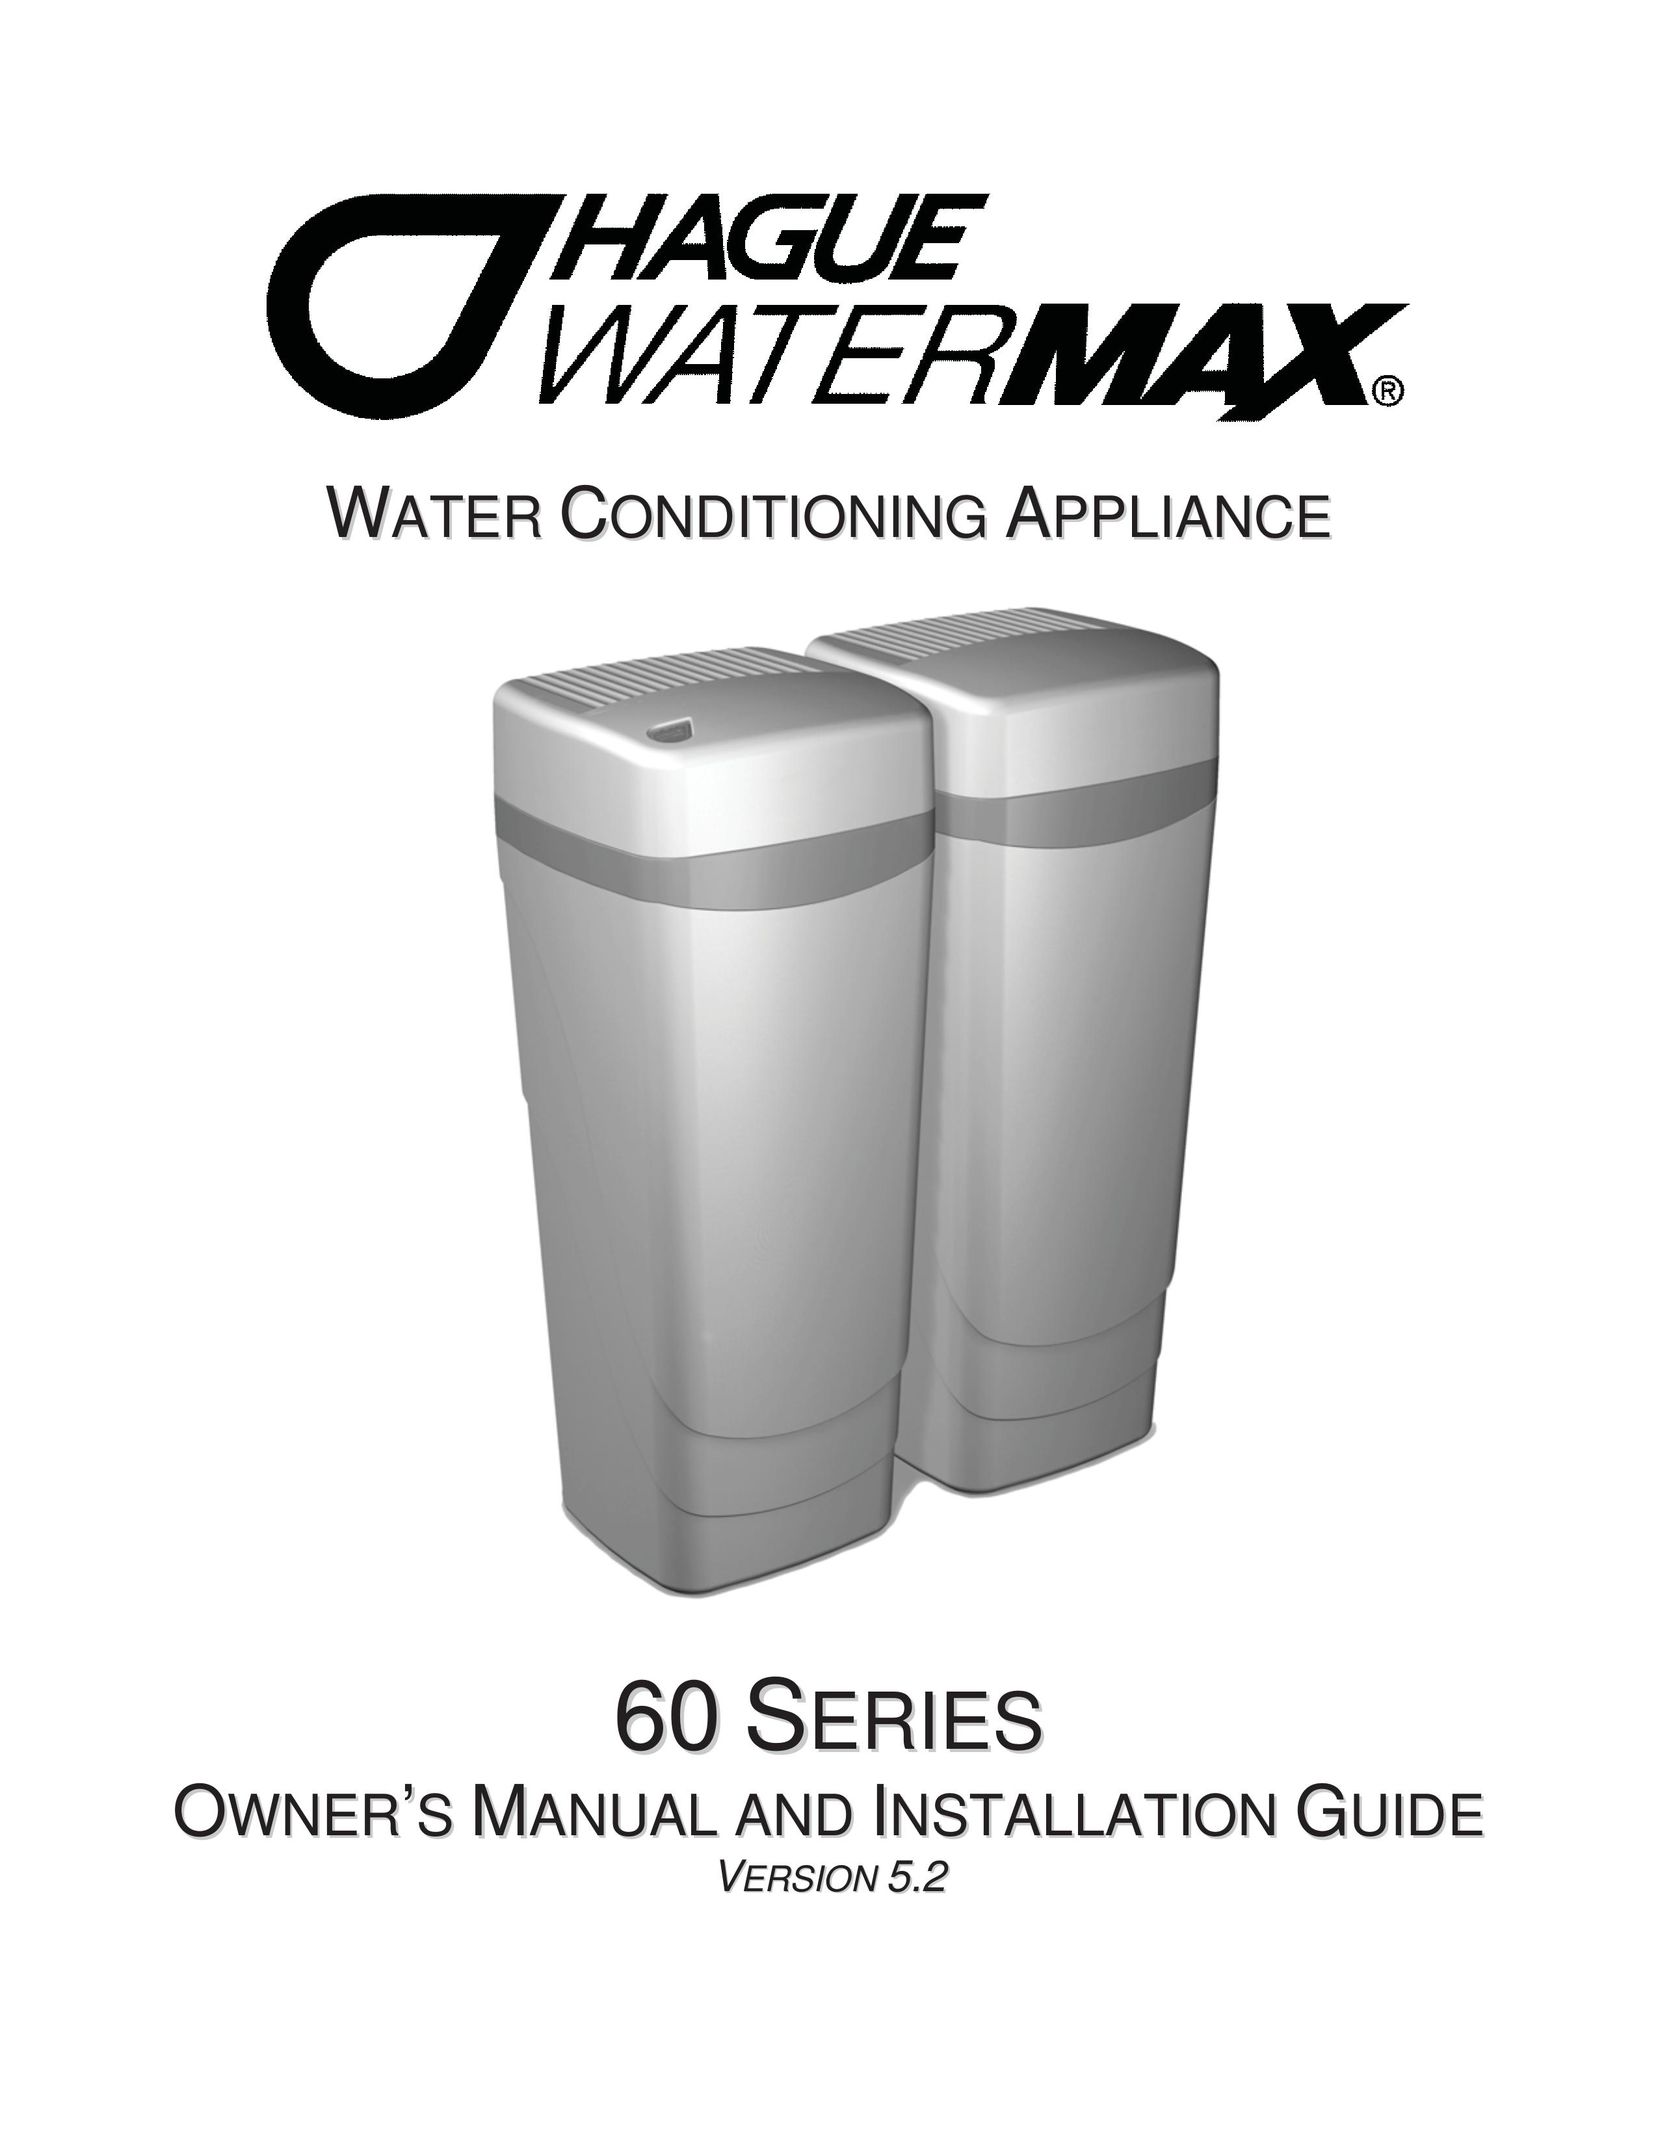 Hague Quality Water Intl 60 SERIES Water System User Manual